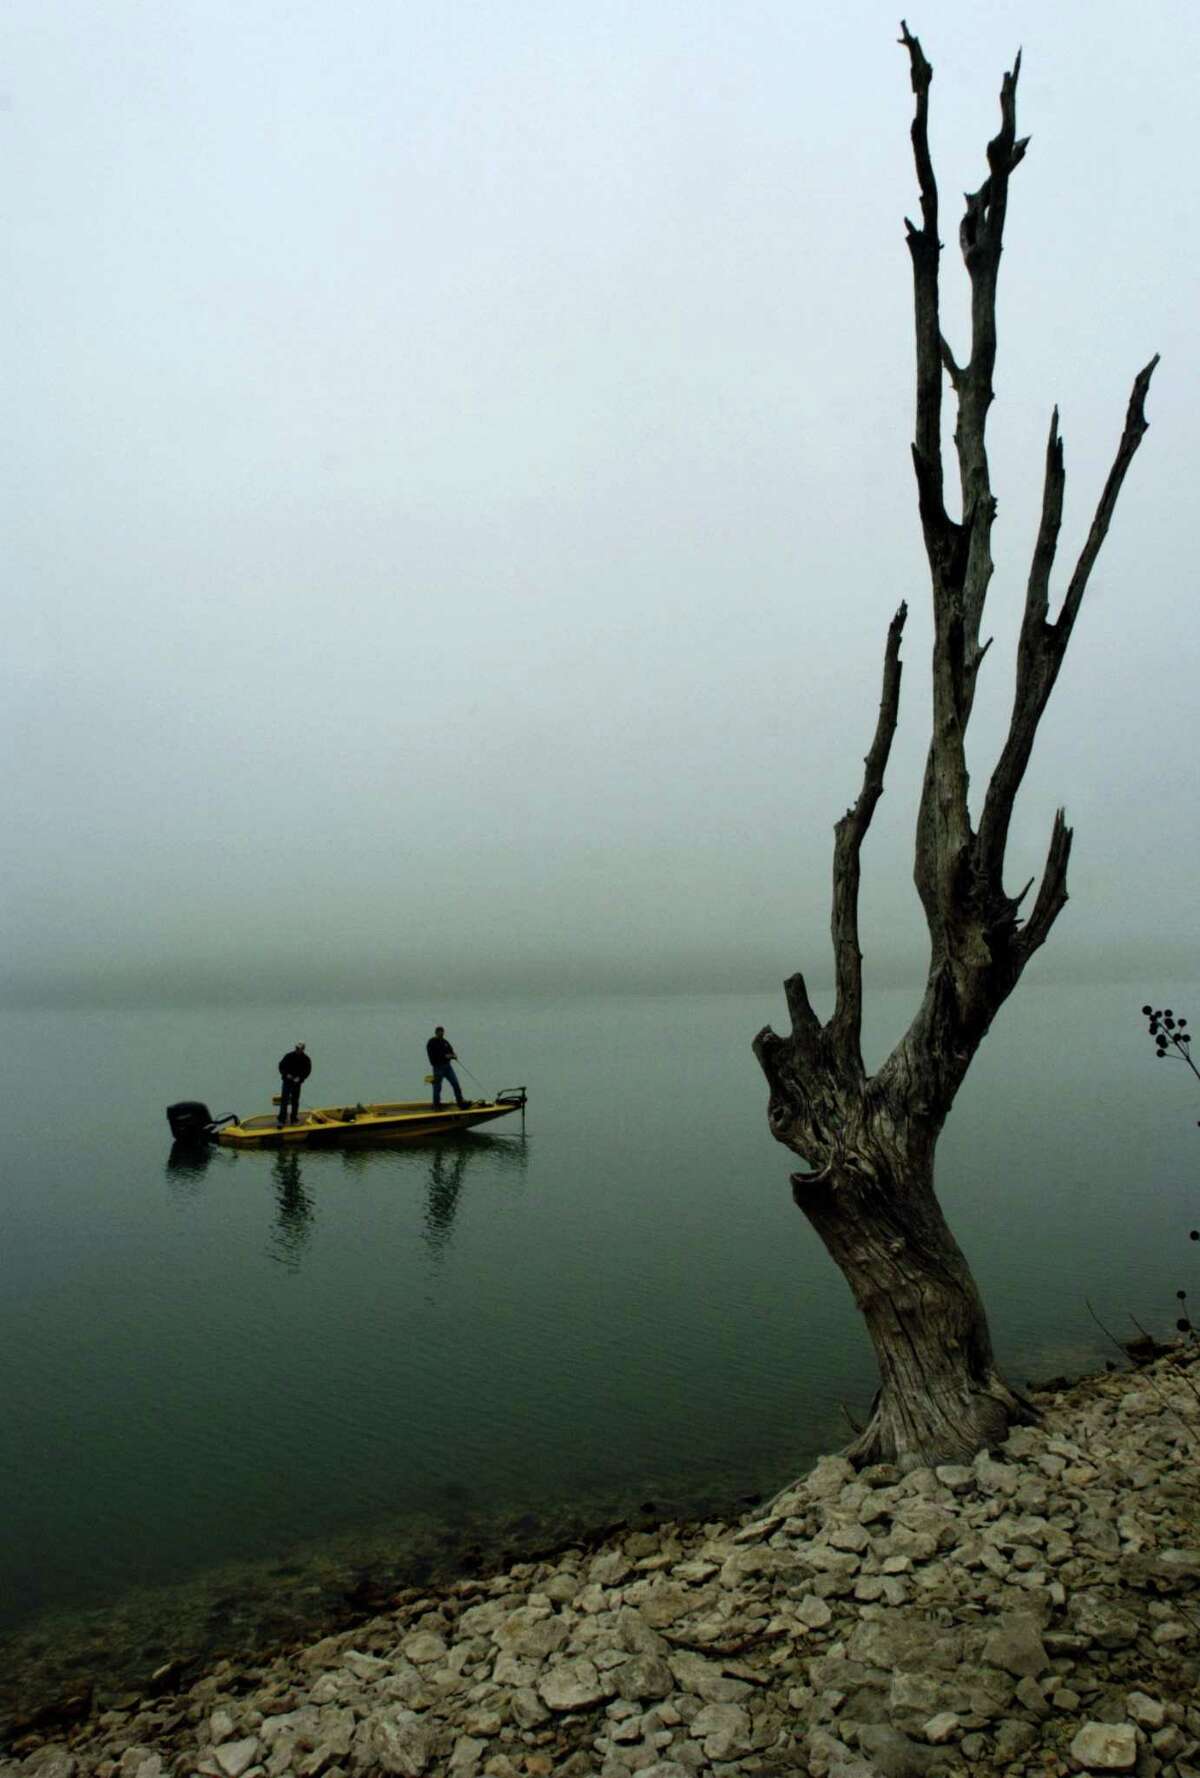 B.J. Gibson, left, and Travis Daugherty, of Jarrell, Texas, fish off their boat on Lake Belton as a recent wave of dense fog hits Central Texas and surrounds them Tuesday, Feb. 21, 2006, in Temple, Texas.